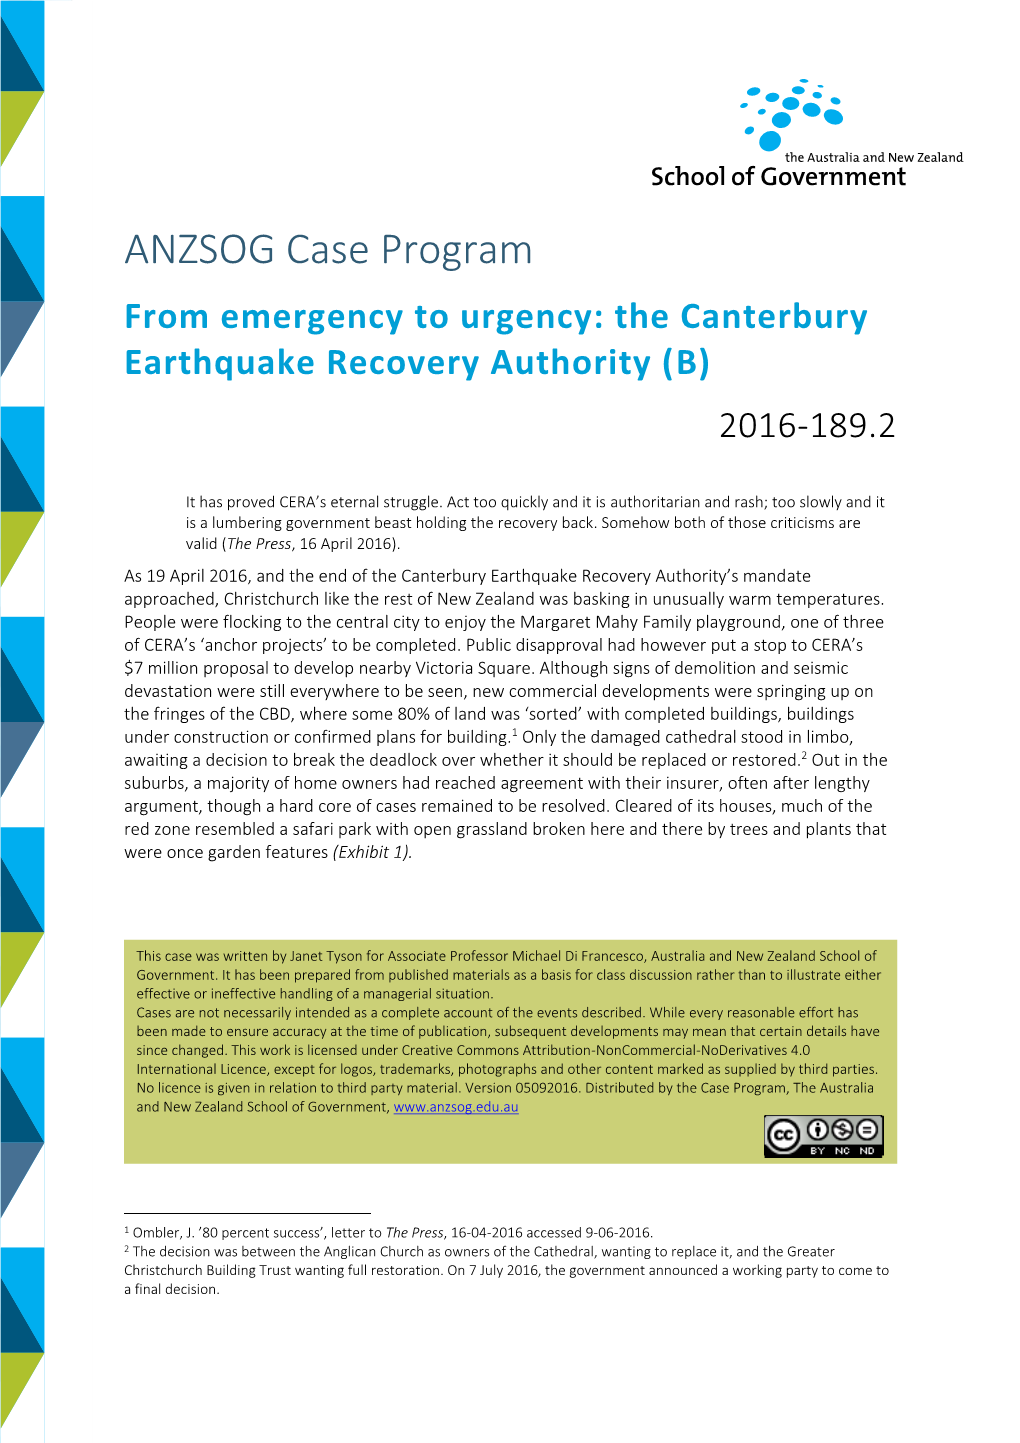 ANZSOG Case Program from Emergency to Urgency: the Canterbury Earthquake Recovery Authority (B) 2016-189.2